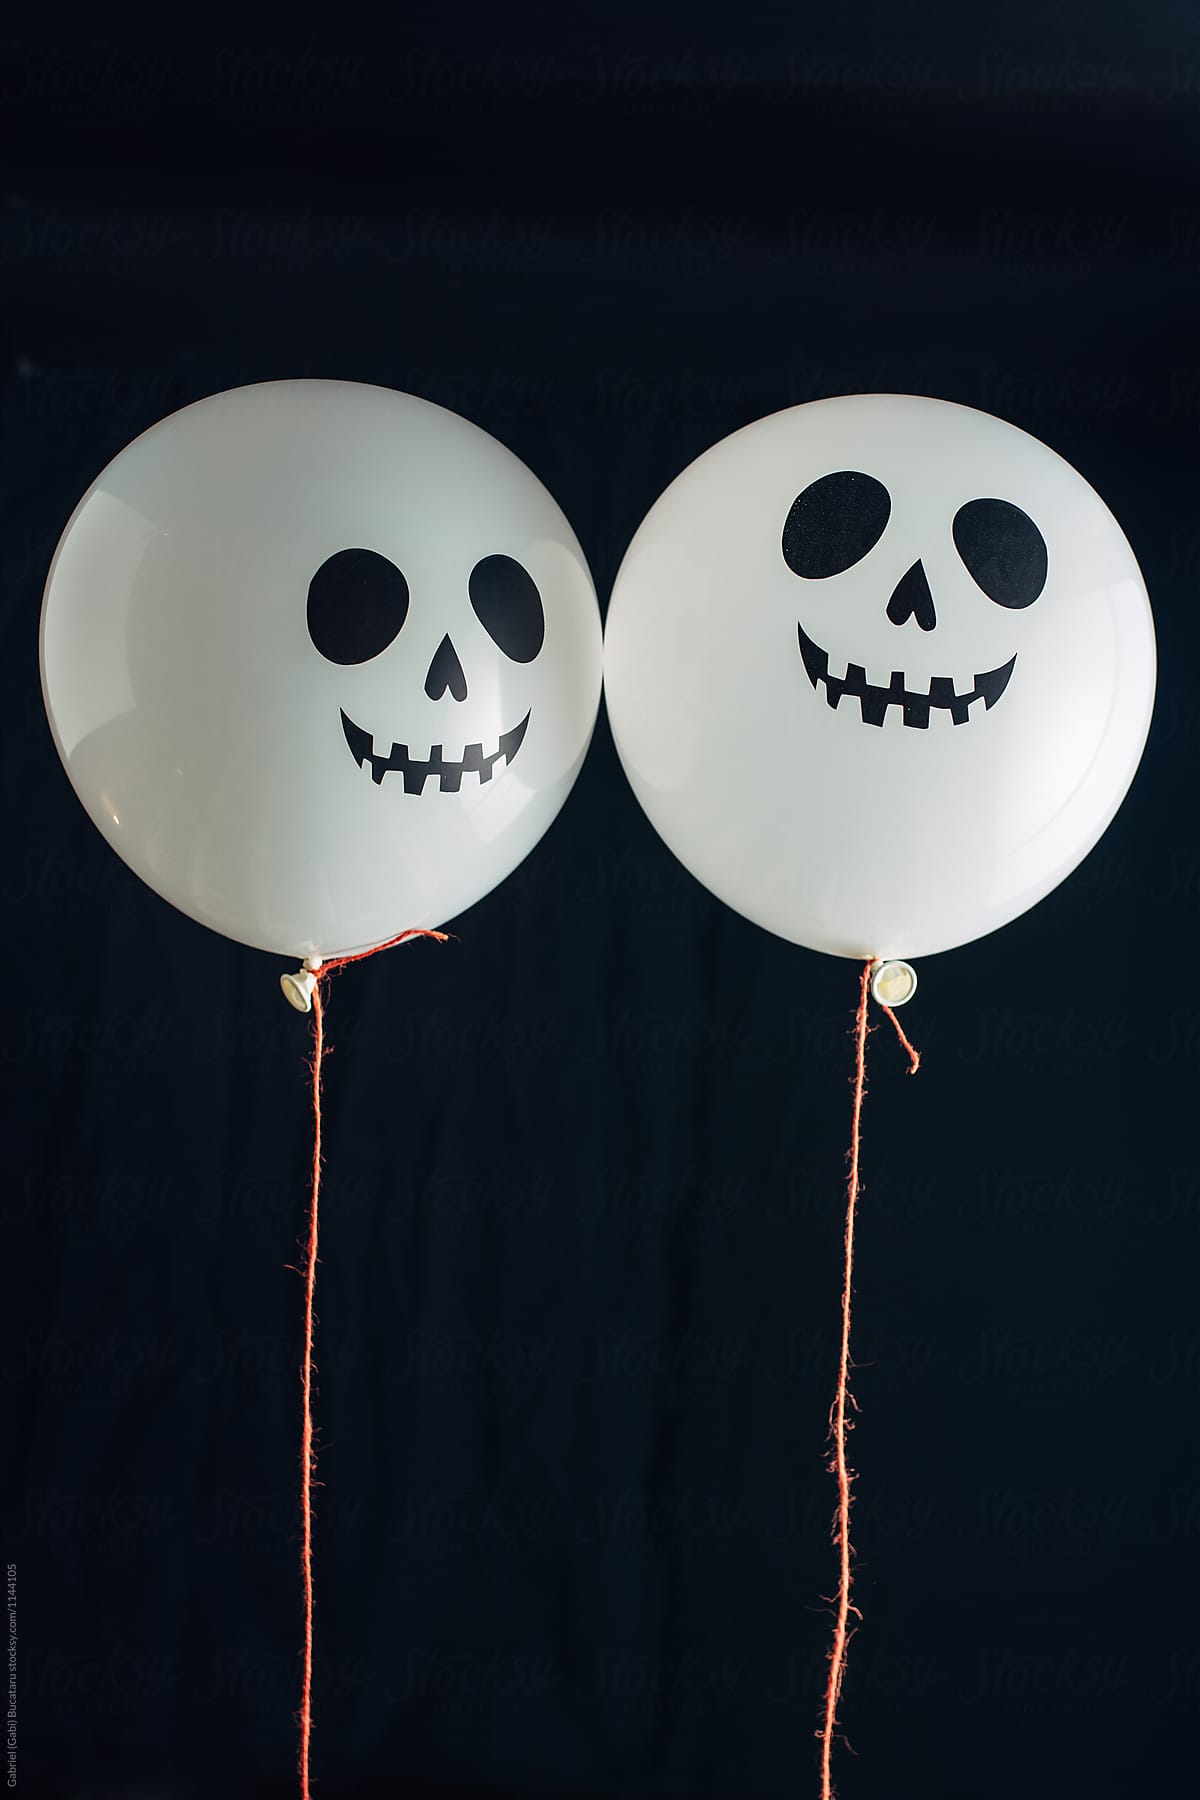 Two spooky Halloween balloons